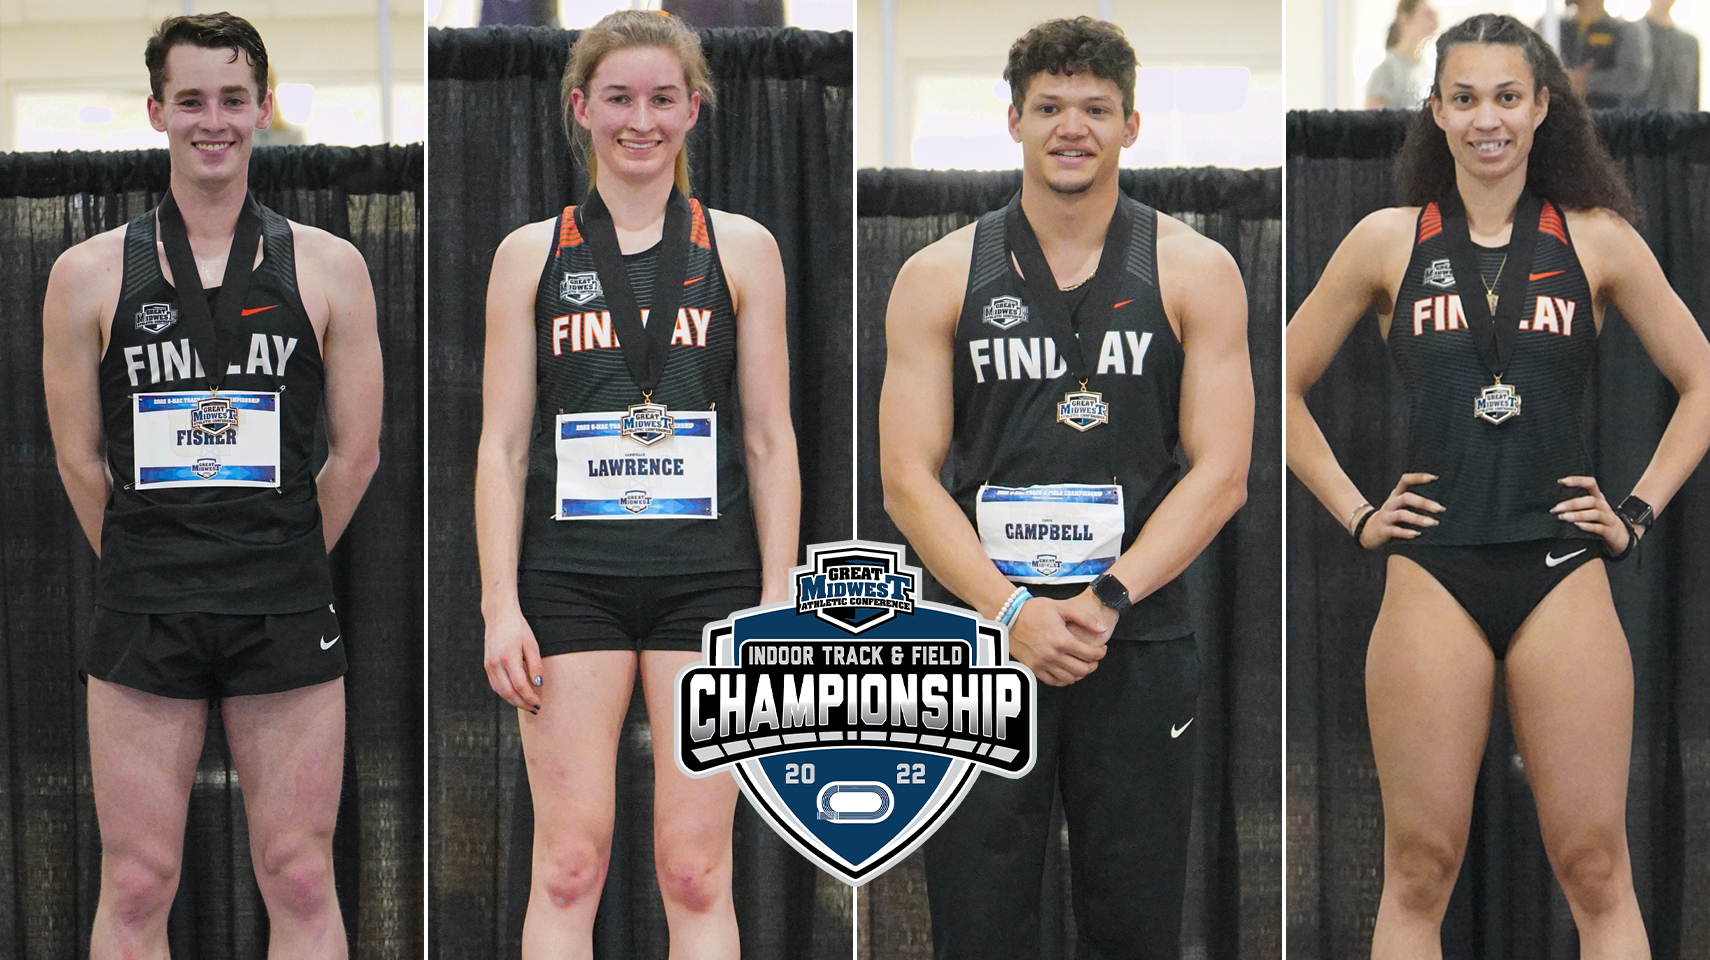 Findlay Crowns Four Champs on Day 1 of G-MAC Championship | Both Teams in First